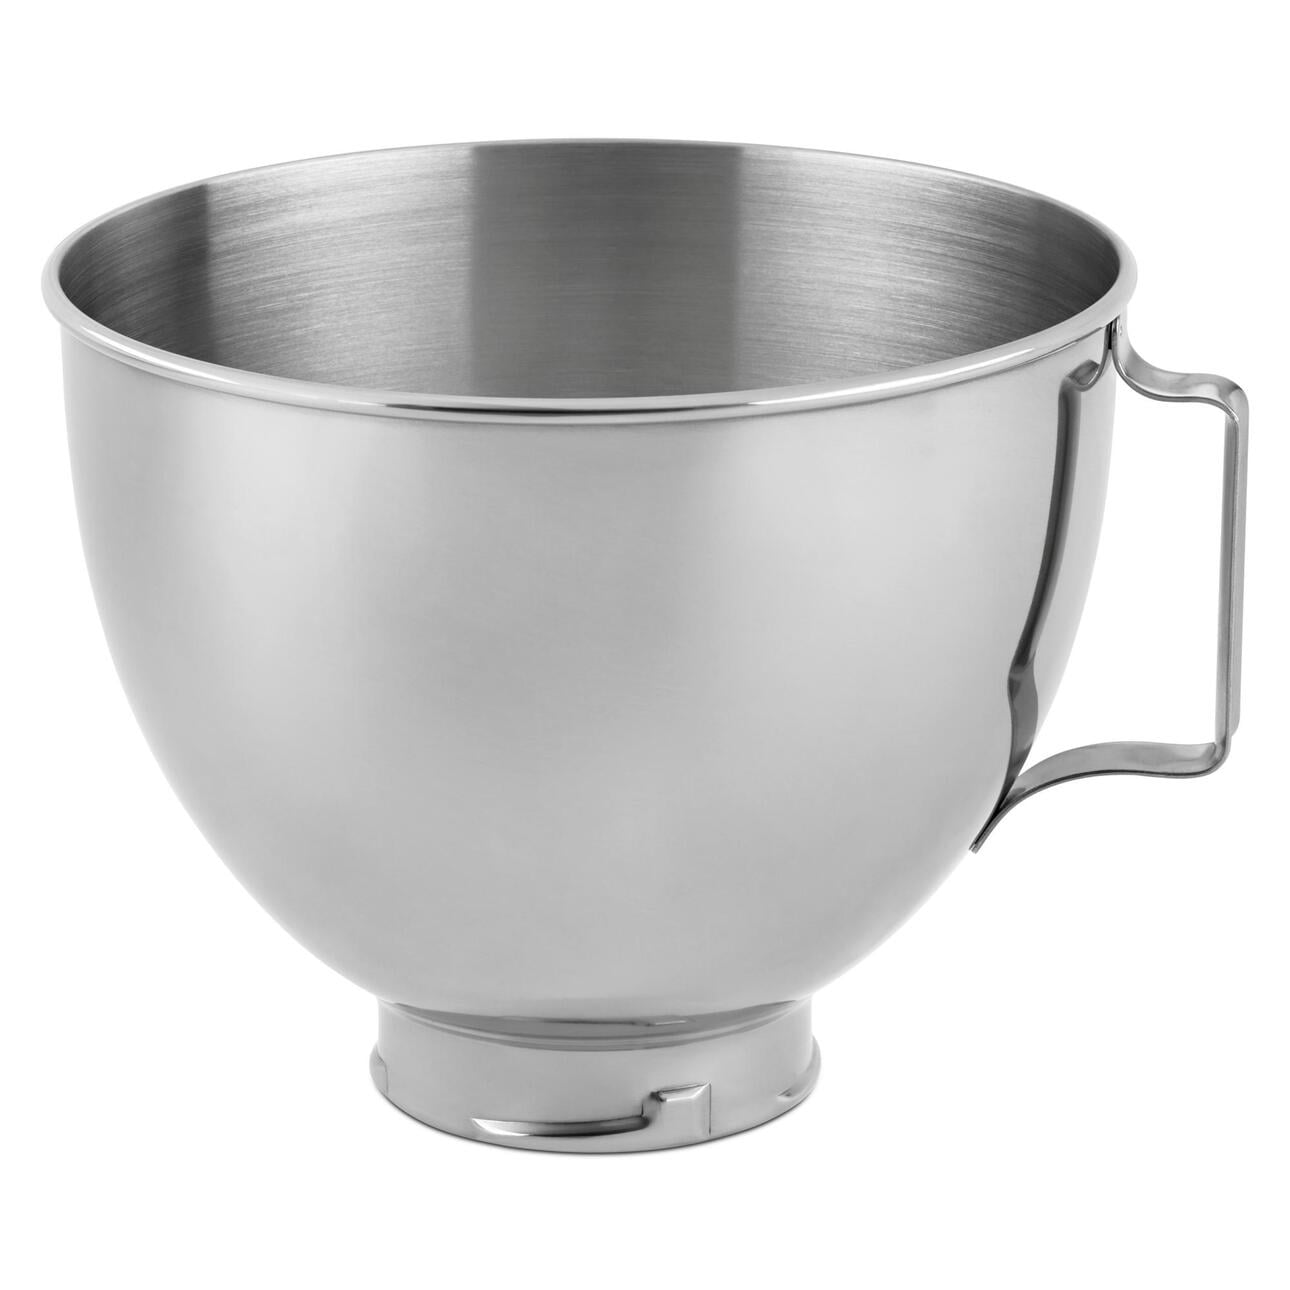 3.5 Quart Polished Stainless Steel Bowl with Handle